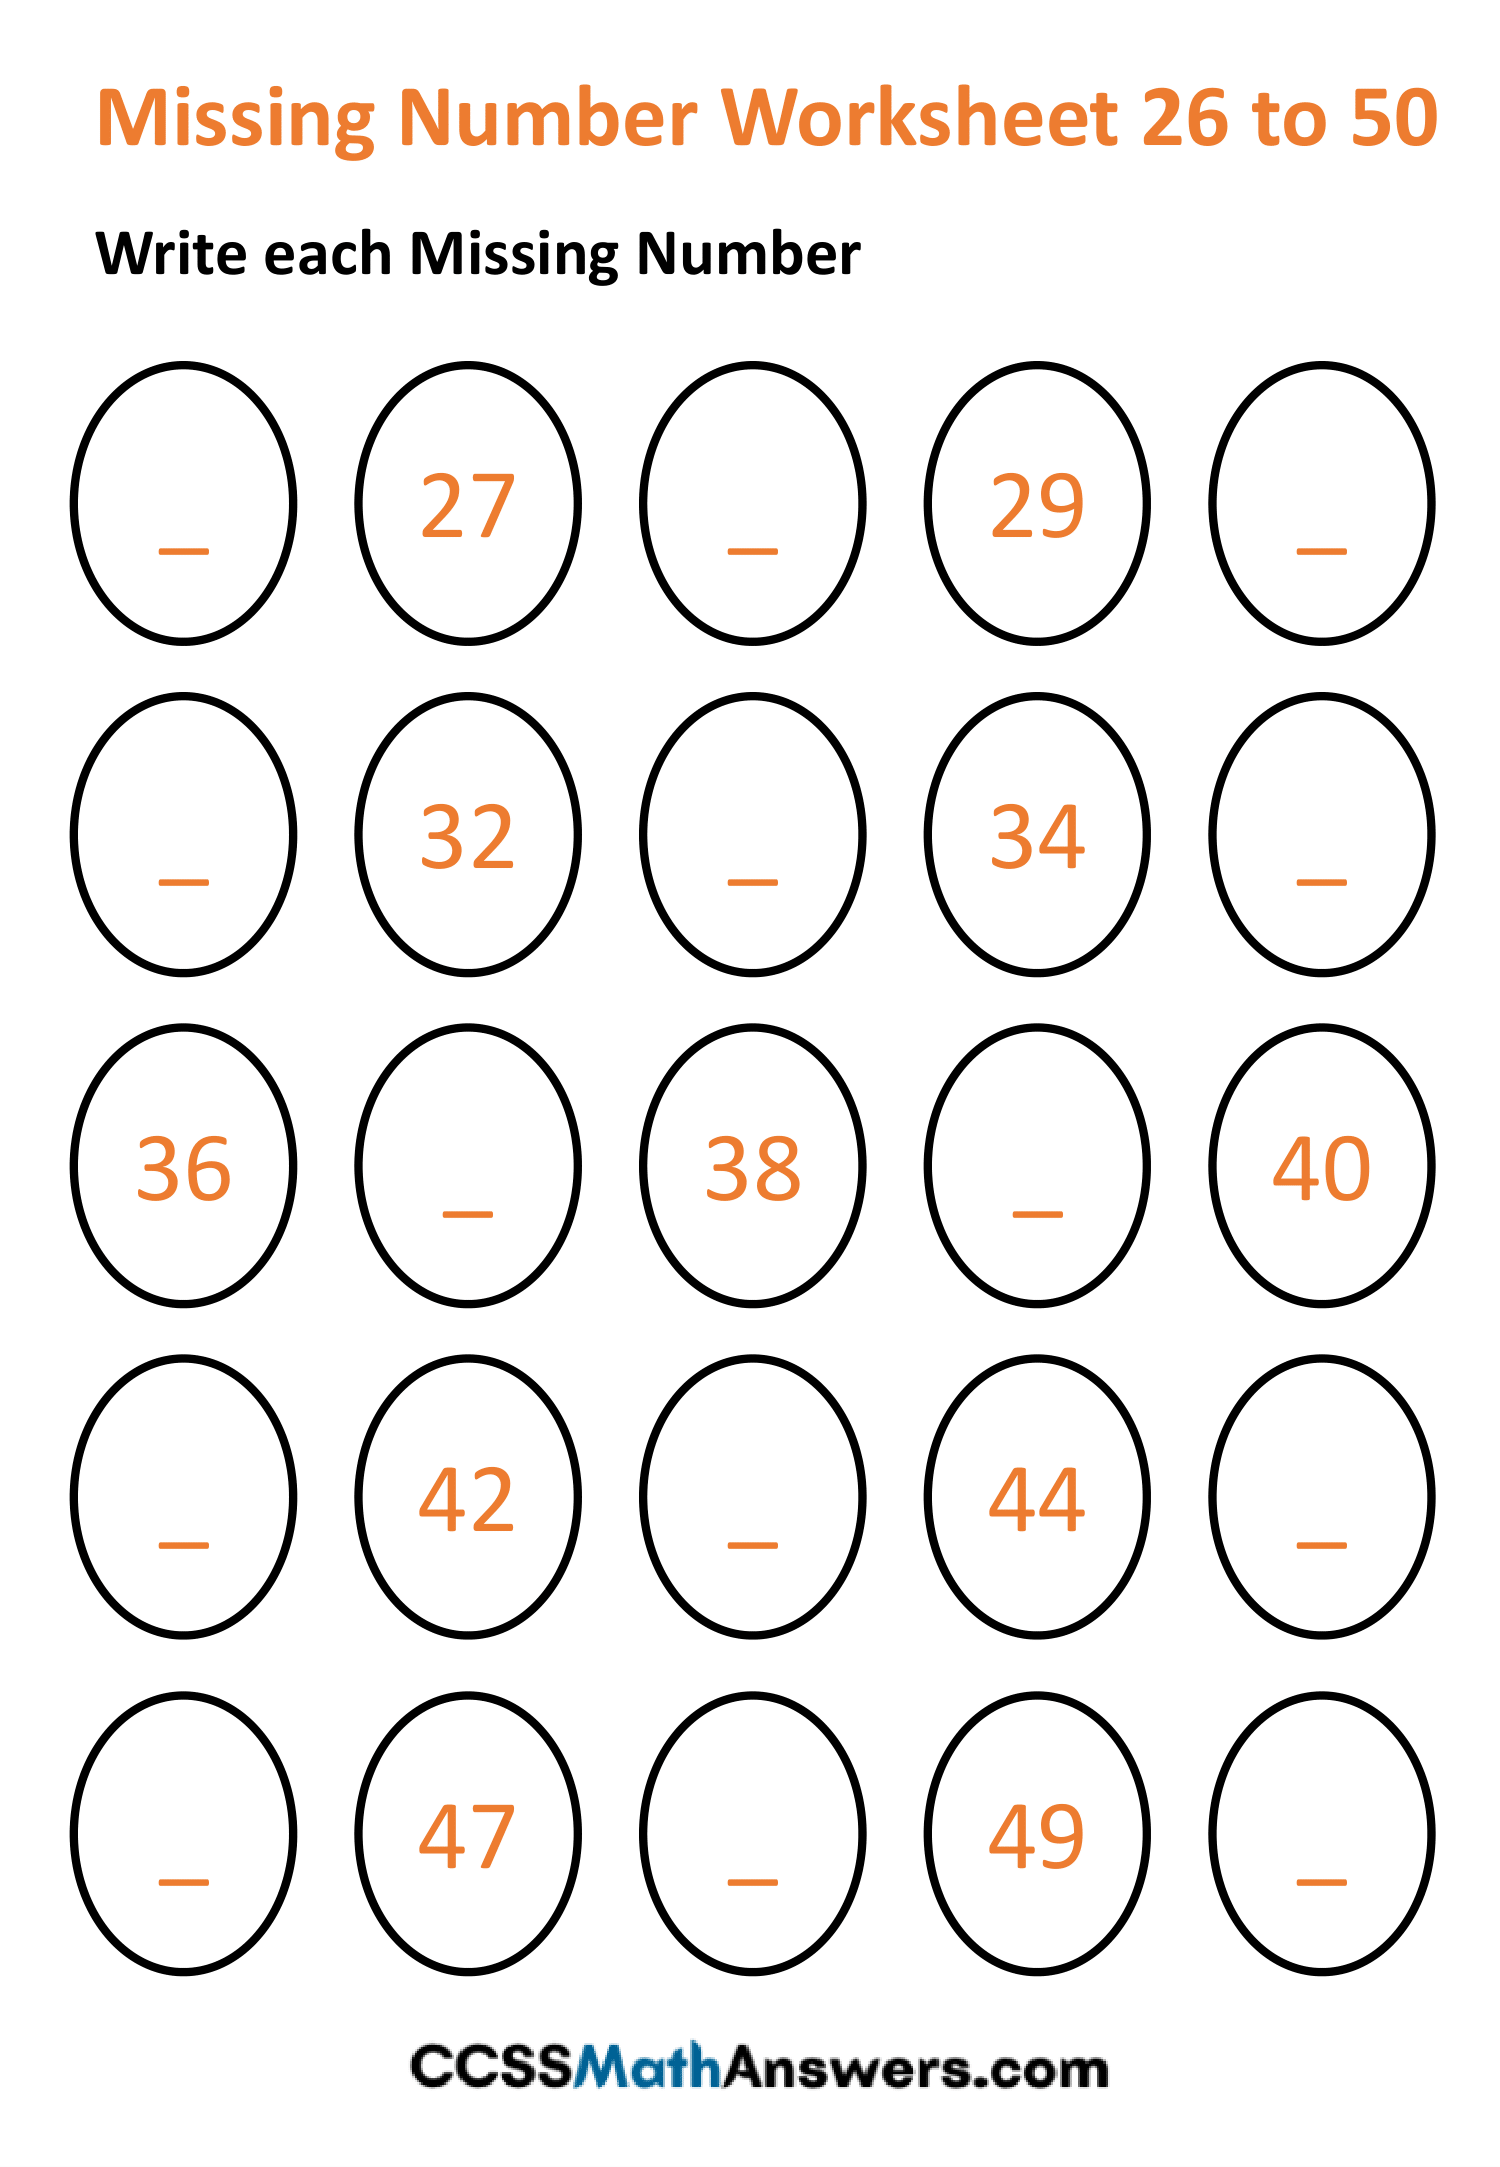 Missing Number Worksheet 1 To 50 CCSS Math Answers